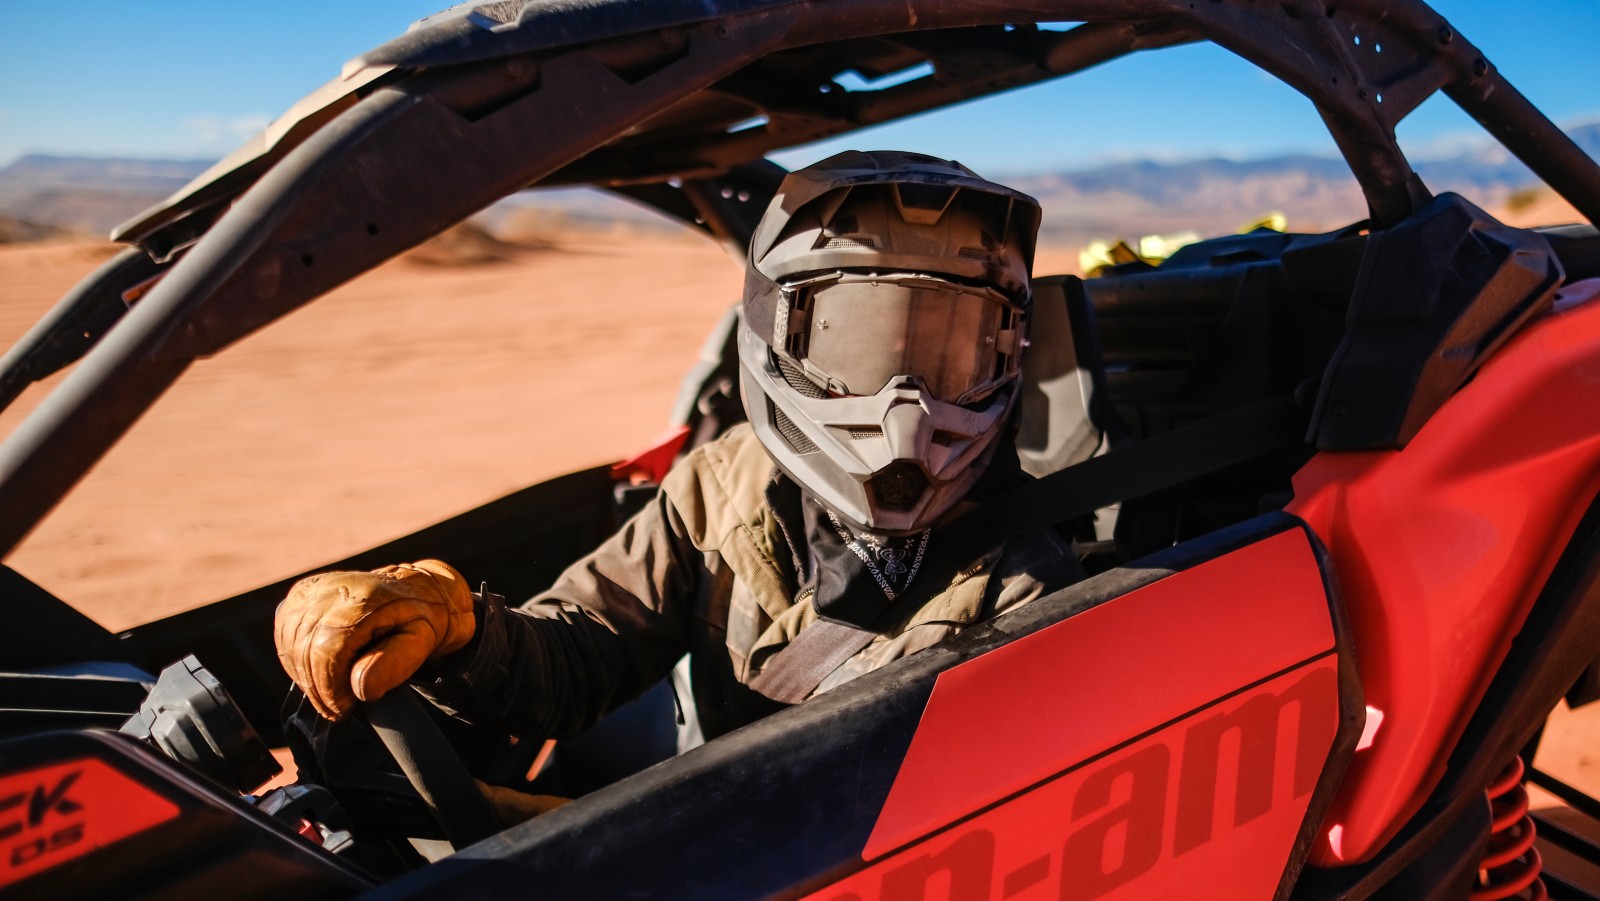 A rider in his Can-Am SxS vehicle